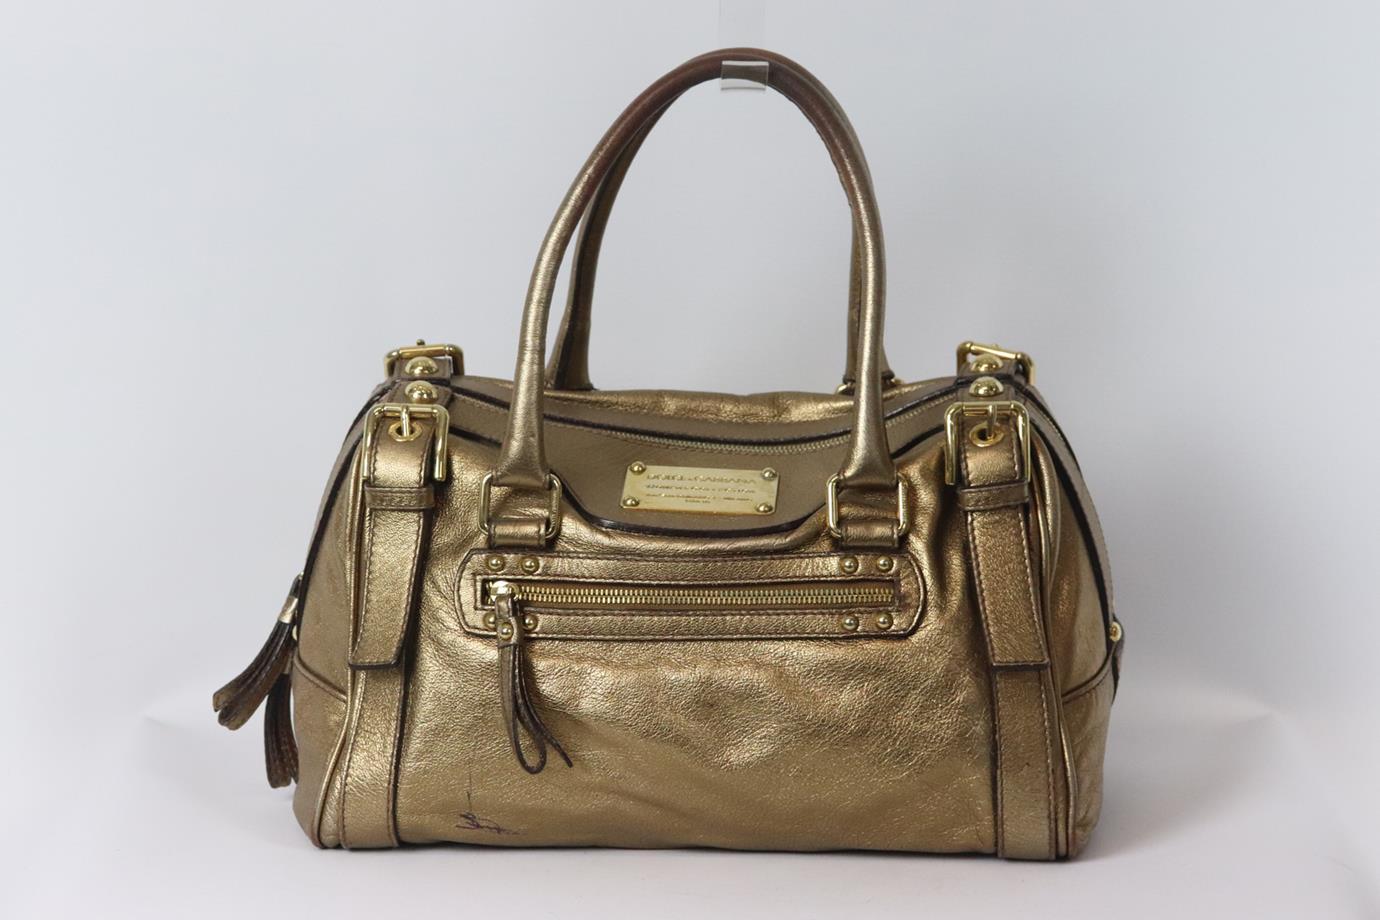 Dolce & Gabbana metallic leather shoulder bag. Bronze. Zip fastening at top. Does not come with dustbag or box. Height: 7.8 in. Width: 12 in. Depth: 8 in. Handle Drop: 8 in. Strap Drop: 14.1 in. Fair Condition - Wear to handles. Marks throughout